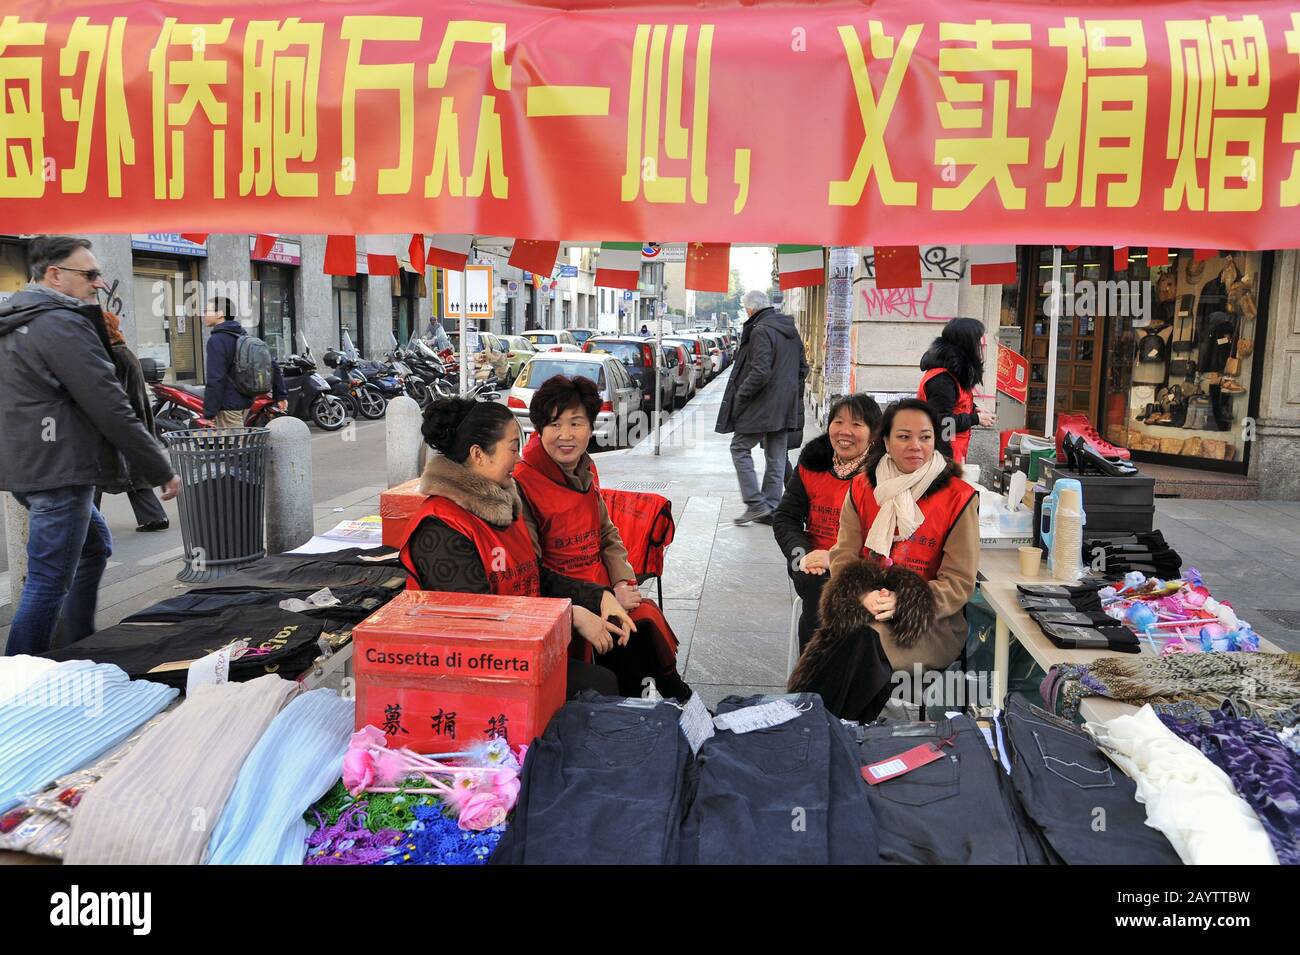 Milan (Italy), February 2020, Chinatown in Paolo Sarpi street, stall for collecting donations in favour of the victims of the Coronavirus epidemic in China Stock Photo